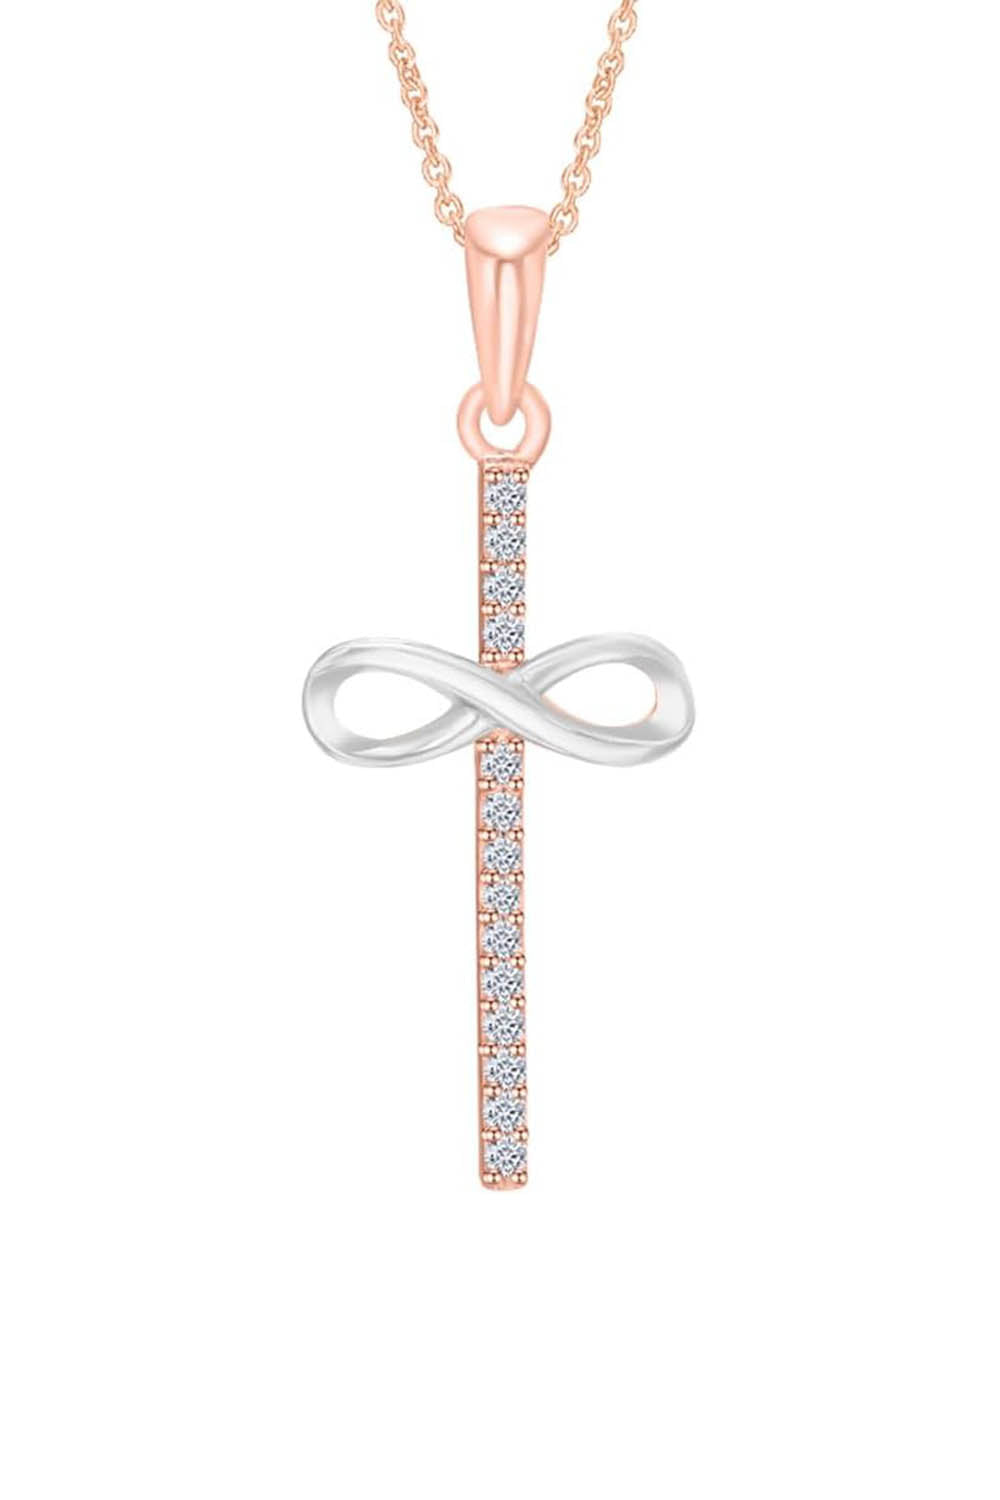 Rose Gold Color Infinity Cross Pendant Necklace, Infinity Necklace